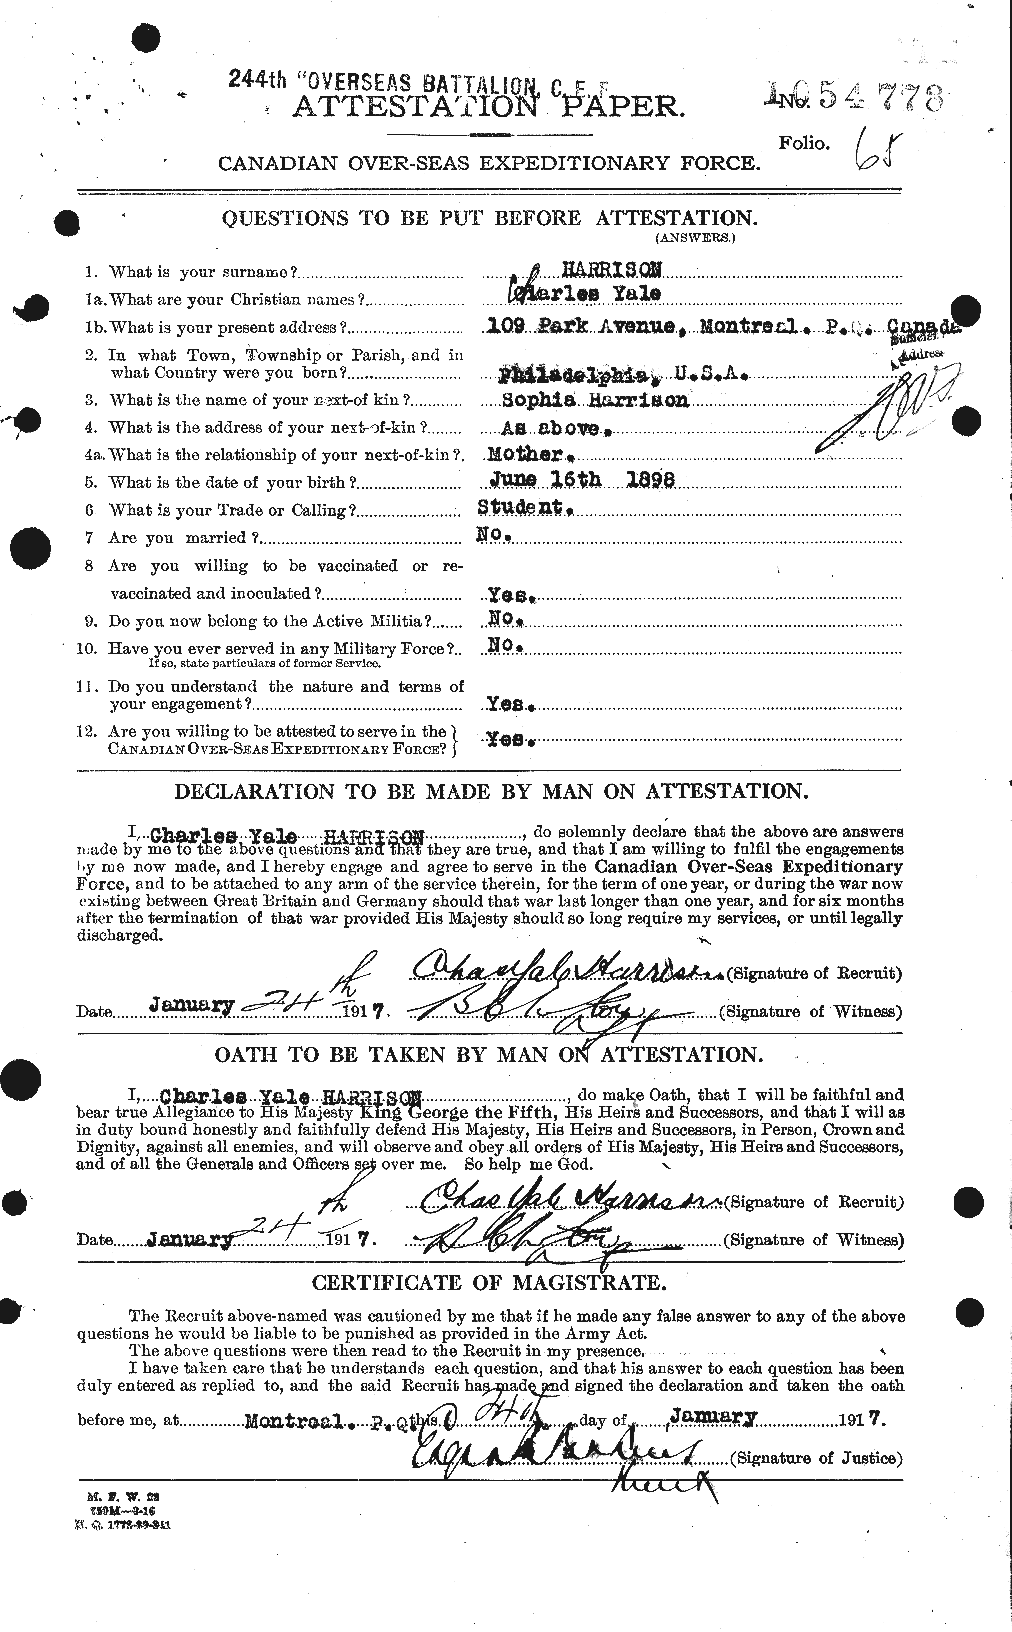 Personnel Records of the First World War - CEF 380290a